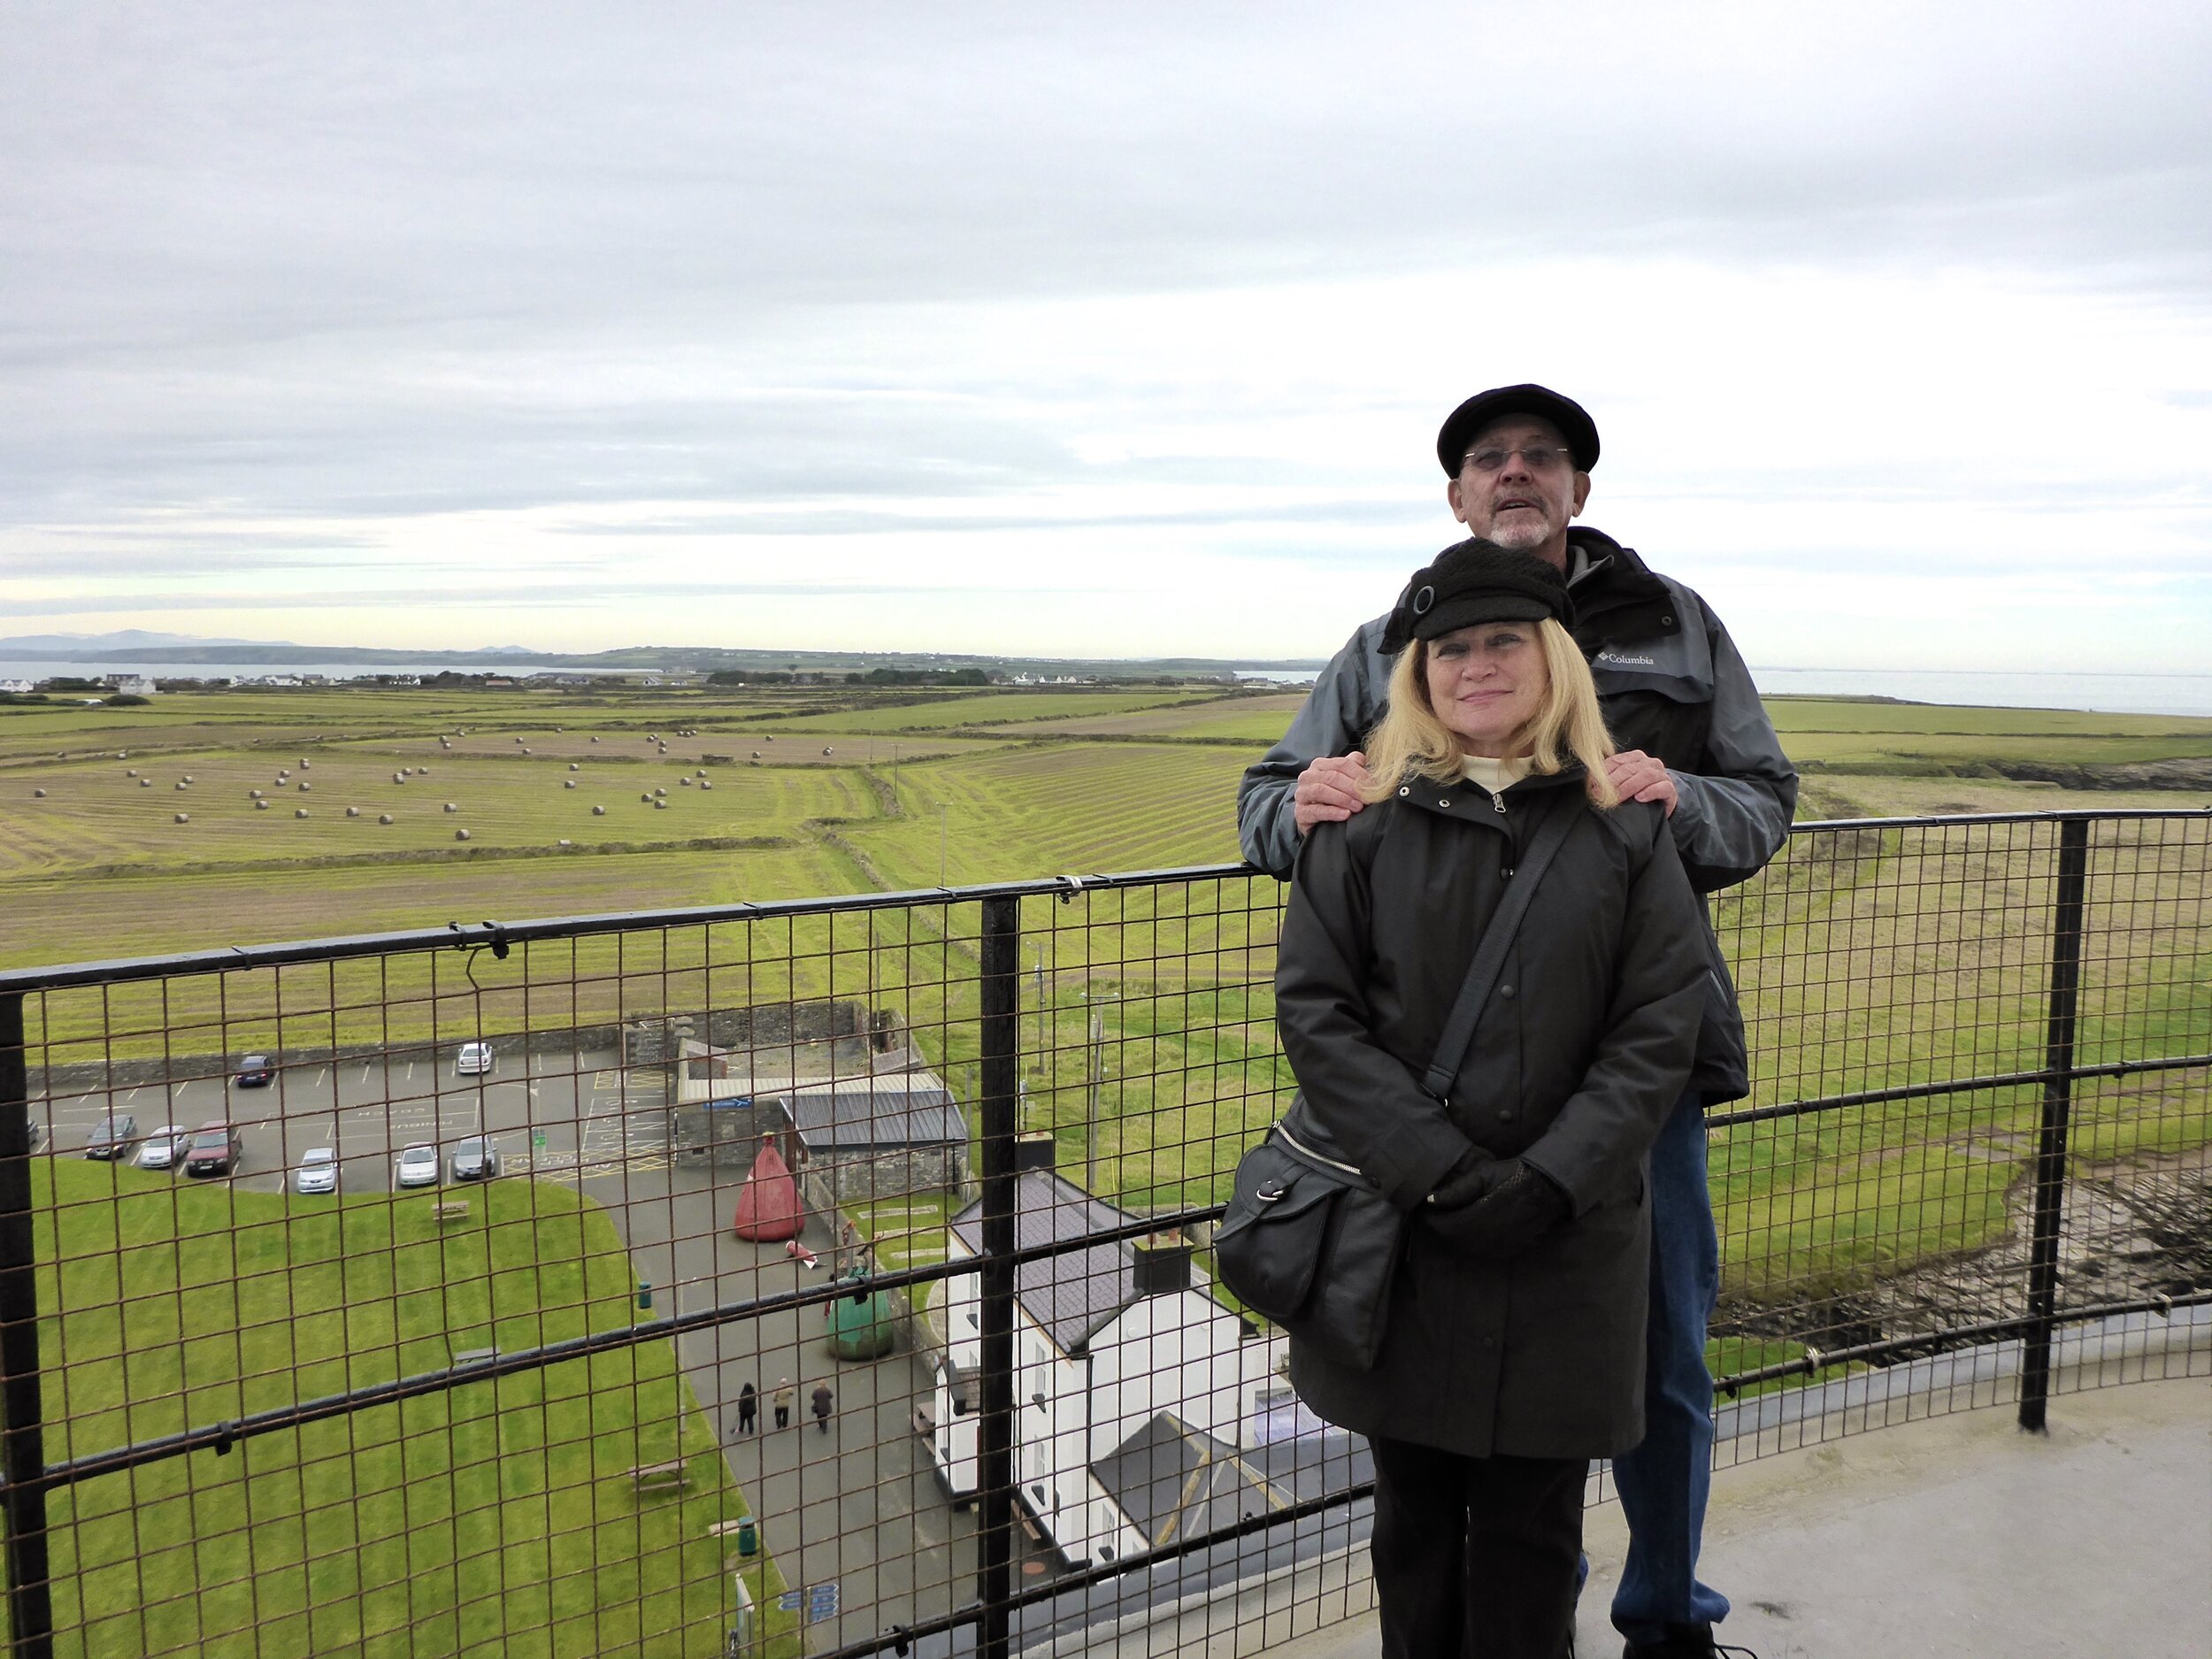 Diane and Ken Merson while visiting Ireland.